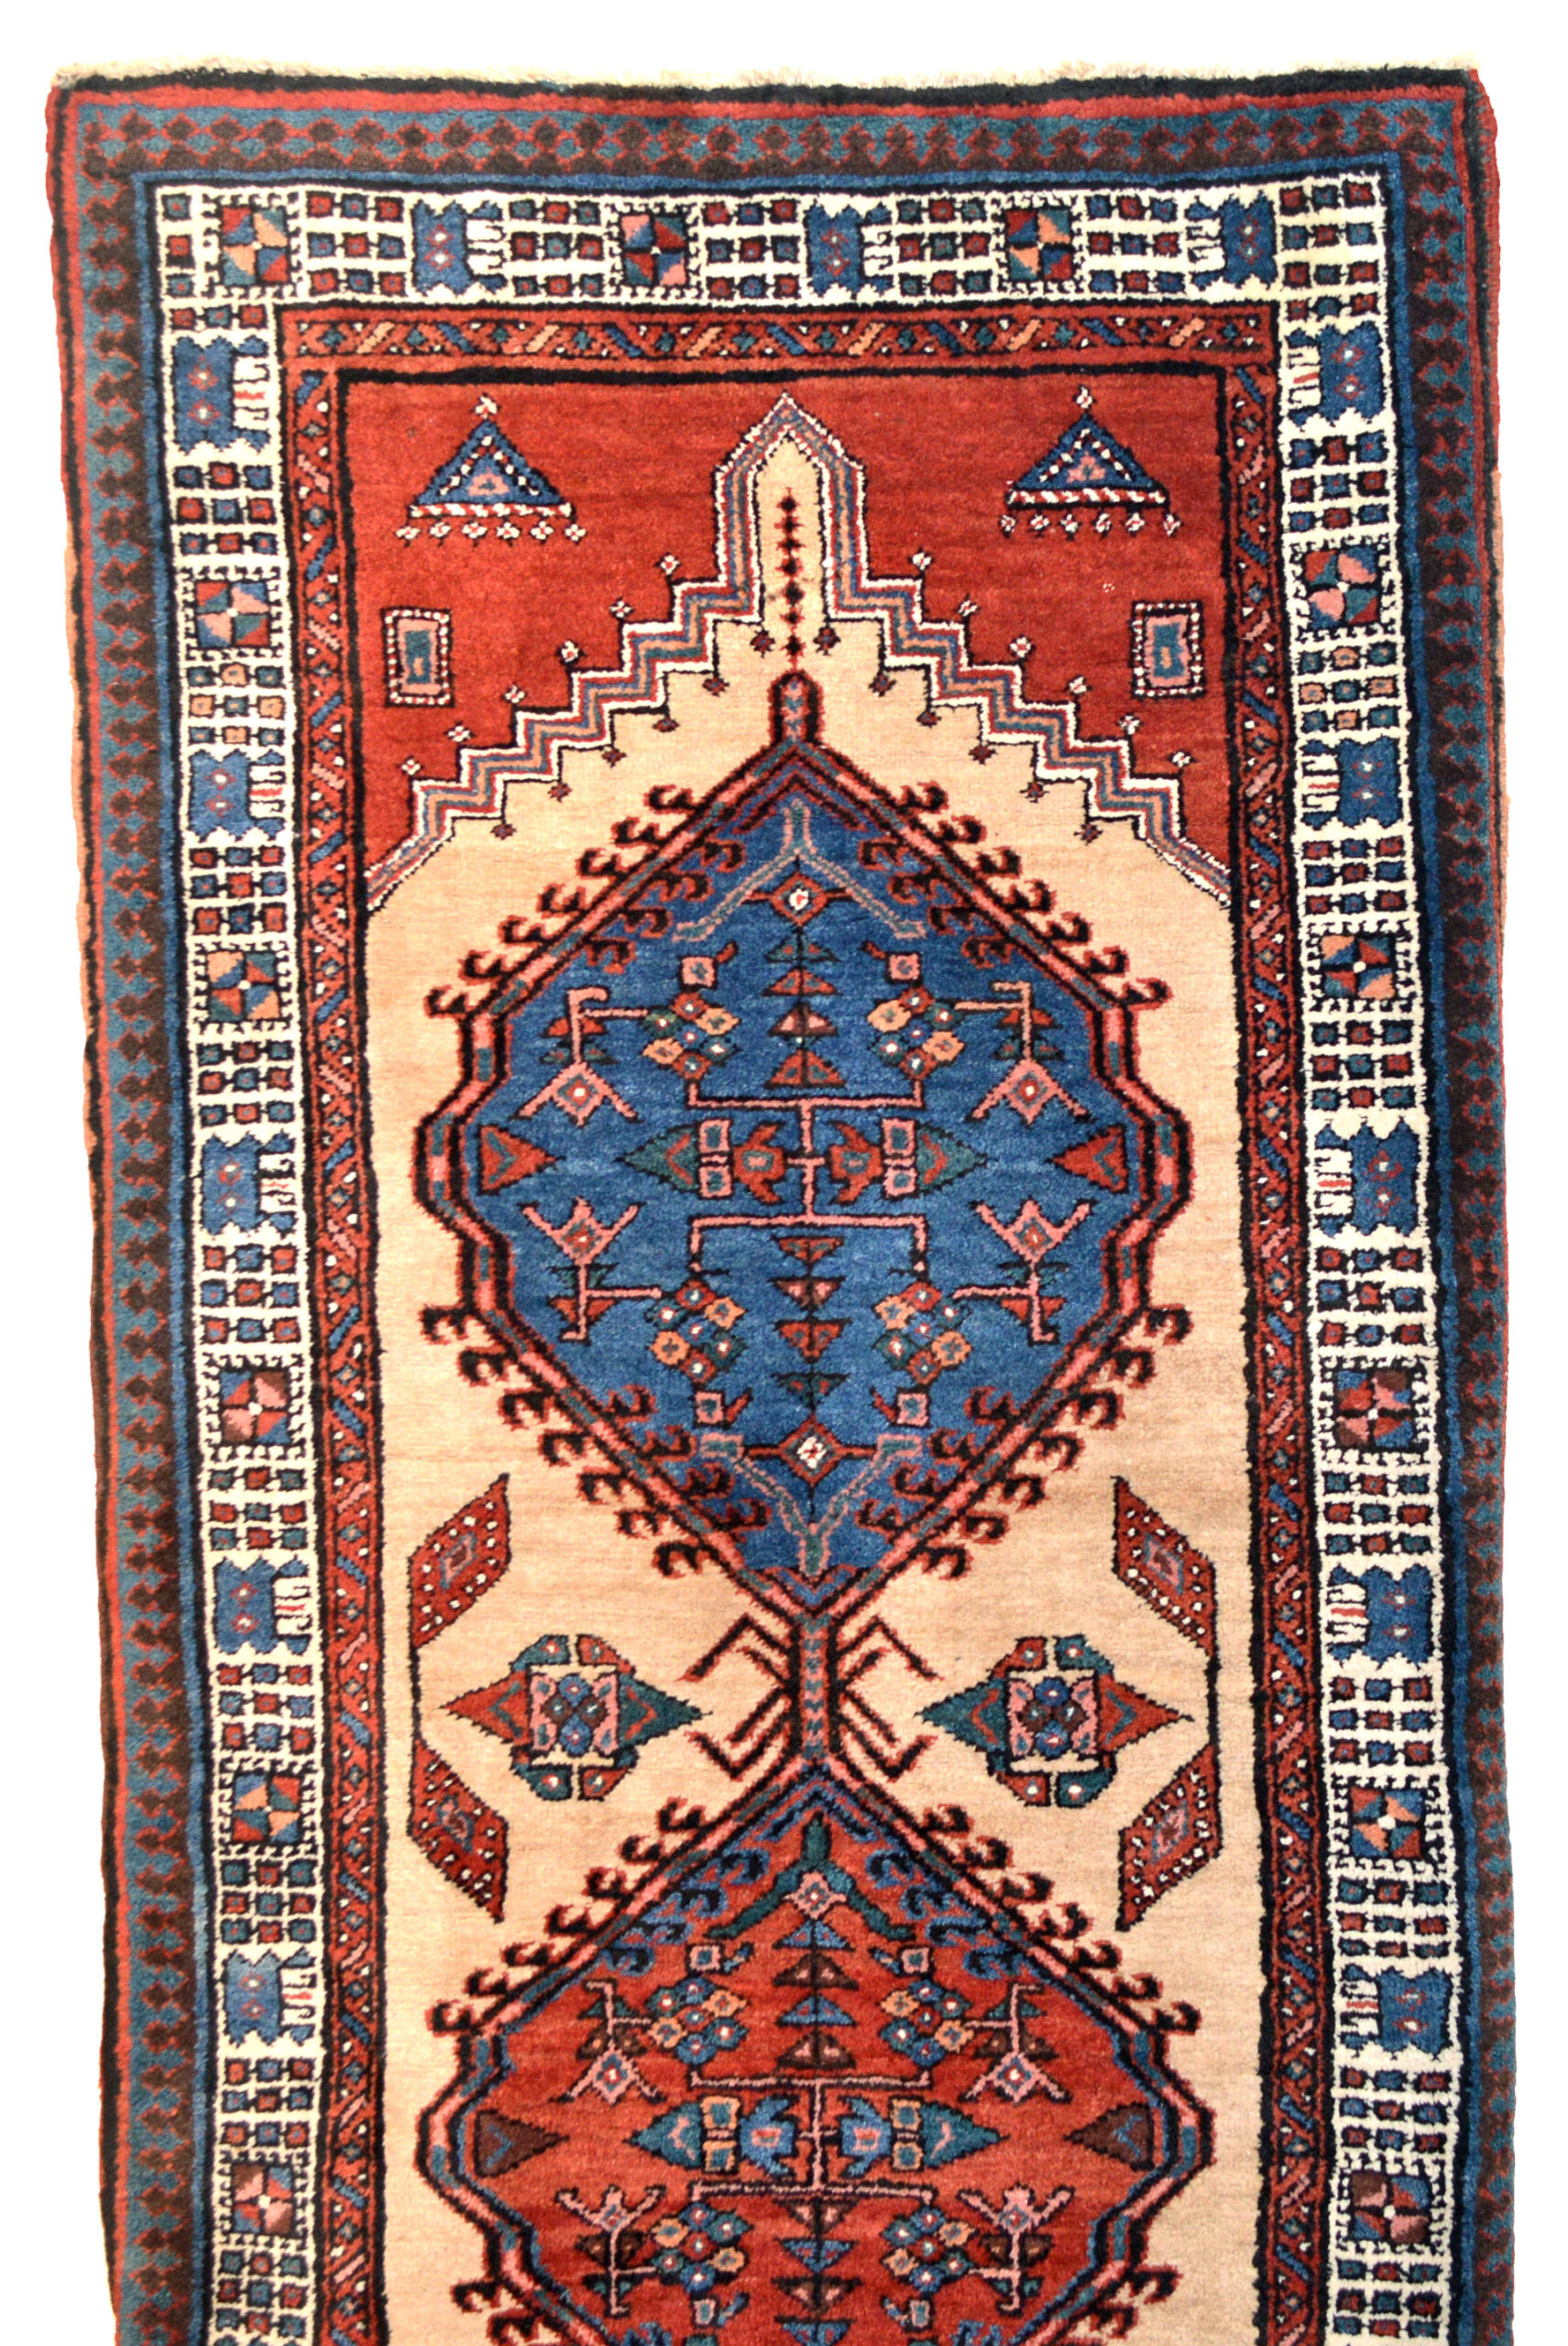 Detail of a vintage Persian Serab runner rug, circa 1930. The light camel color field is decorated with two mid blue medallions and two soft red medallions. An ivory major border and a Reciprocal Trefoil design outer guard border frame the field. Douglas Stock Gallery offers vintage Persian rugs and vintage Oriental rugs for clients in the Boston area, throughout New England, New York and across the United States. We work with individual clients, architects and interior designers for projects utilizing antique rugs and vintage rugs, new farmhouse style interior decor, vintage rugs for modern interiors